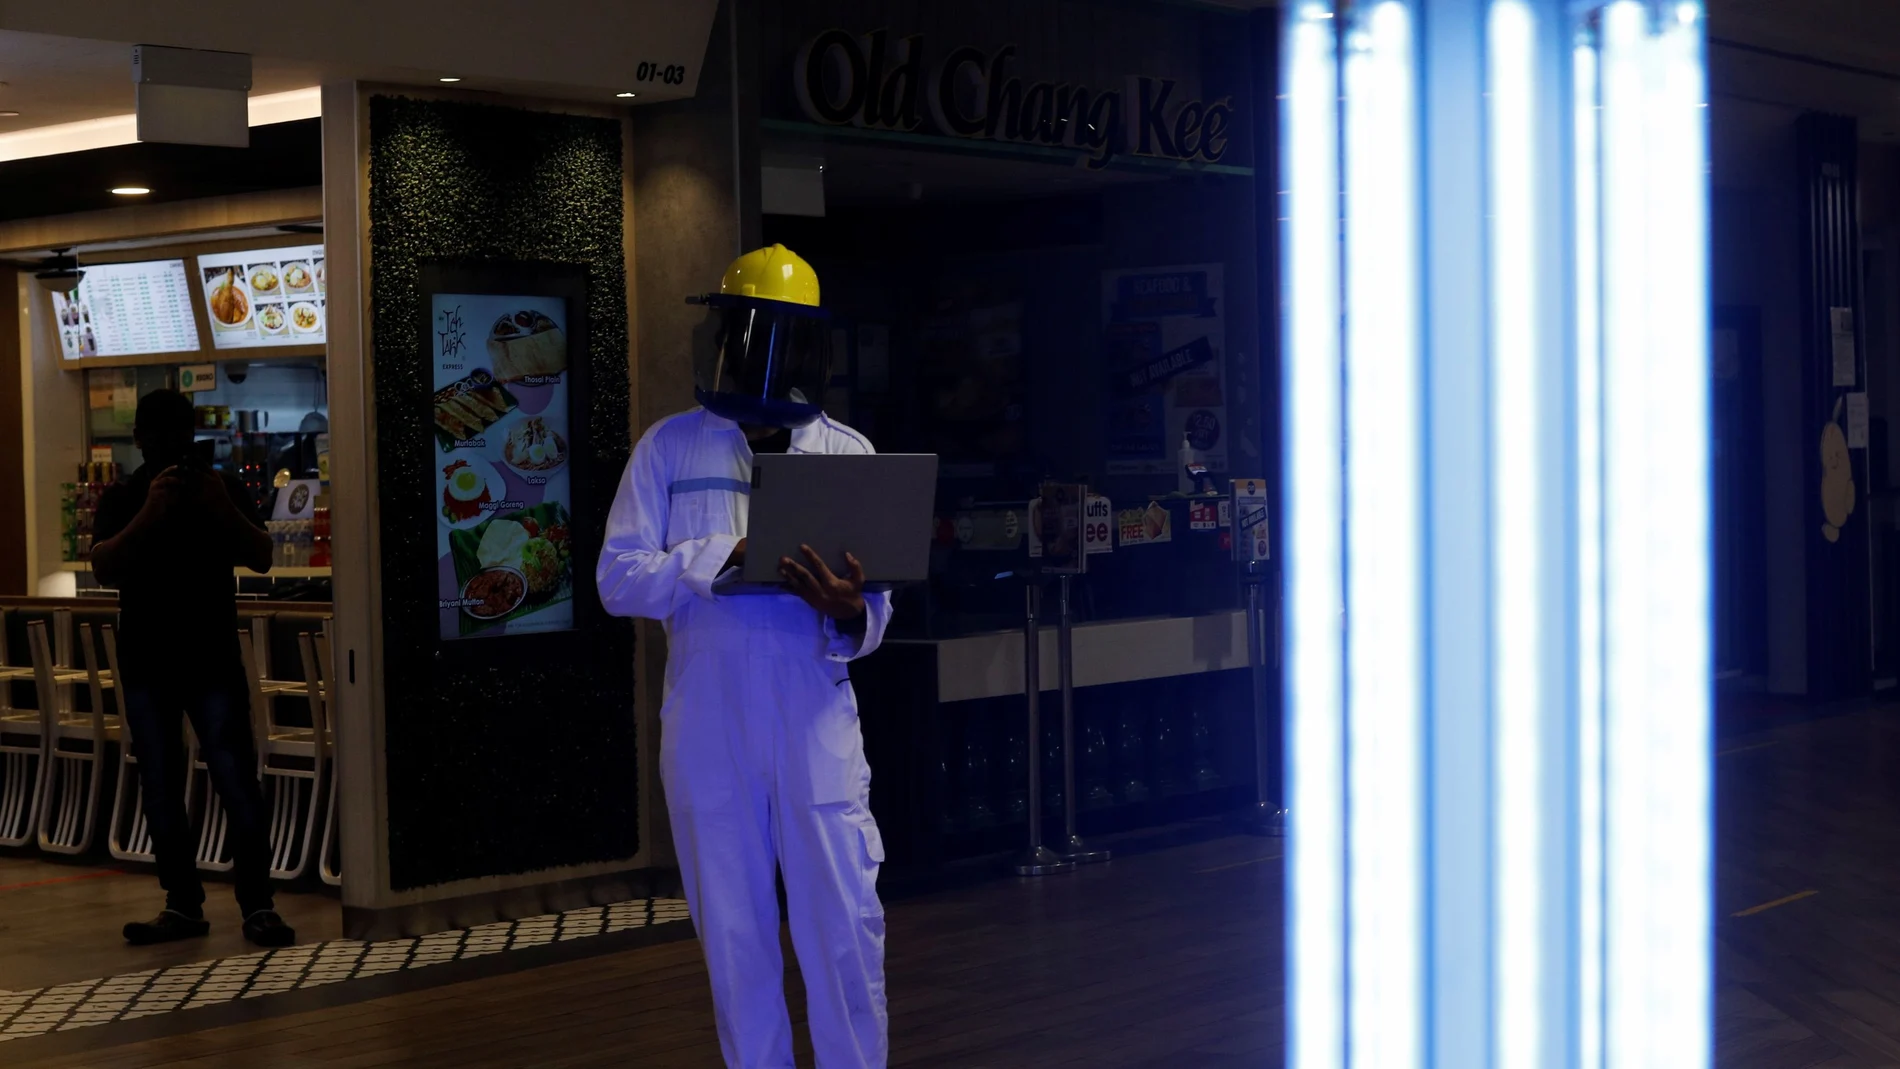 An autonomous mobile robot that disinfects surfaces with ultraviolet light, known as Sunburst UV Bot, is deployed at Northpoint City shopping mall amid the coronavirus disease (COVID-19) outbreak in Singapore